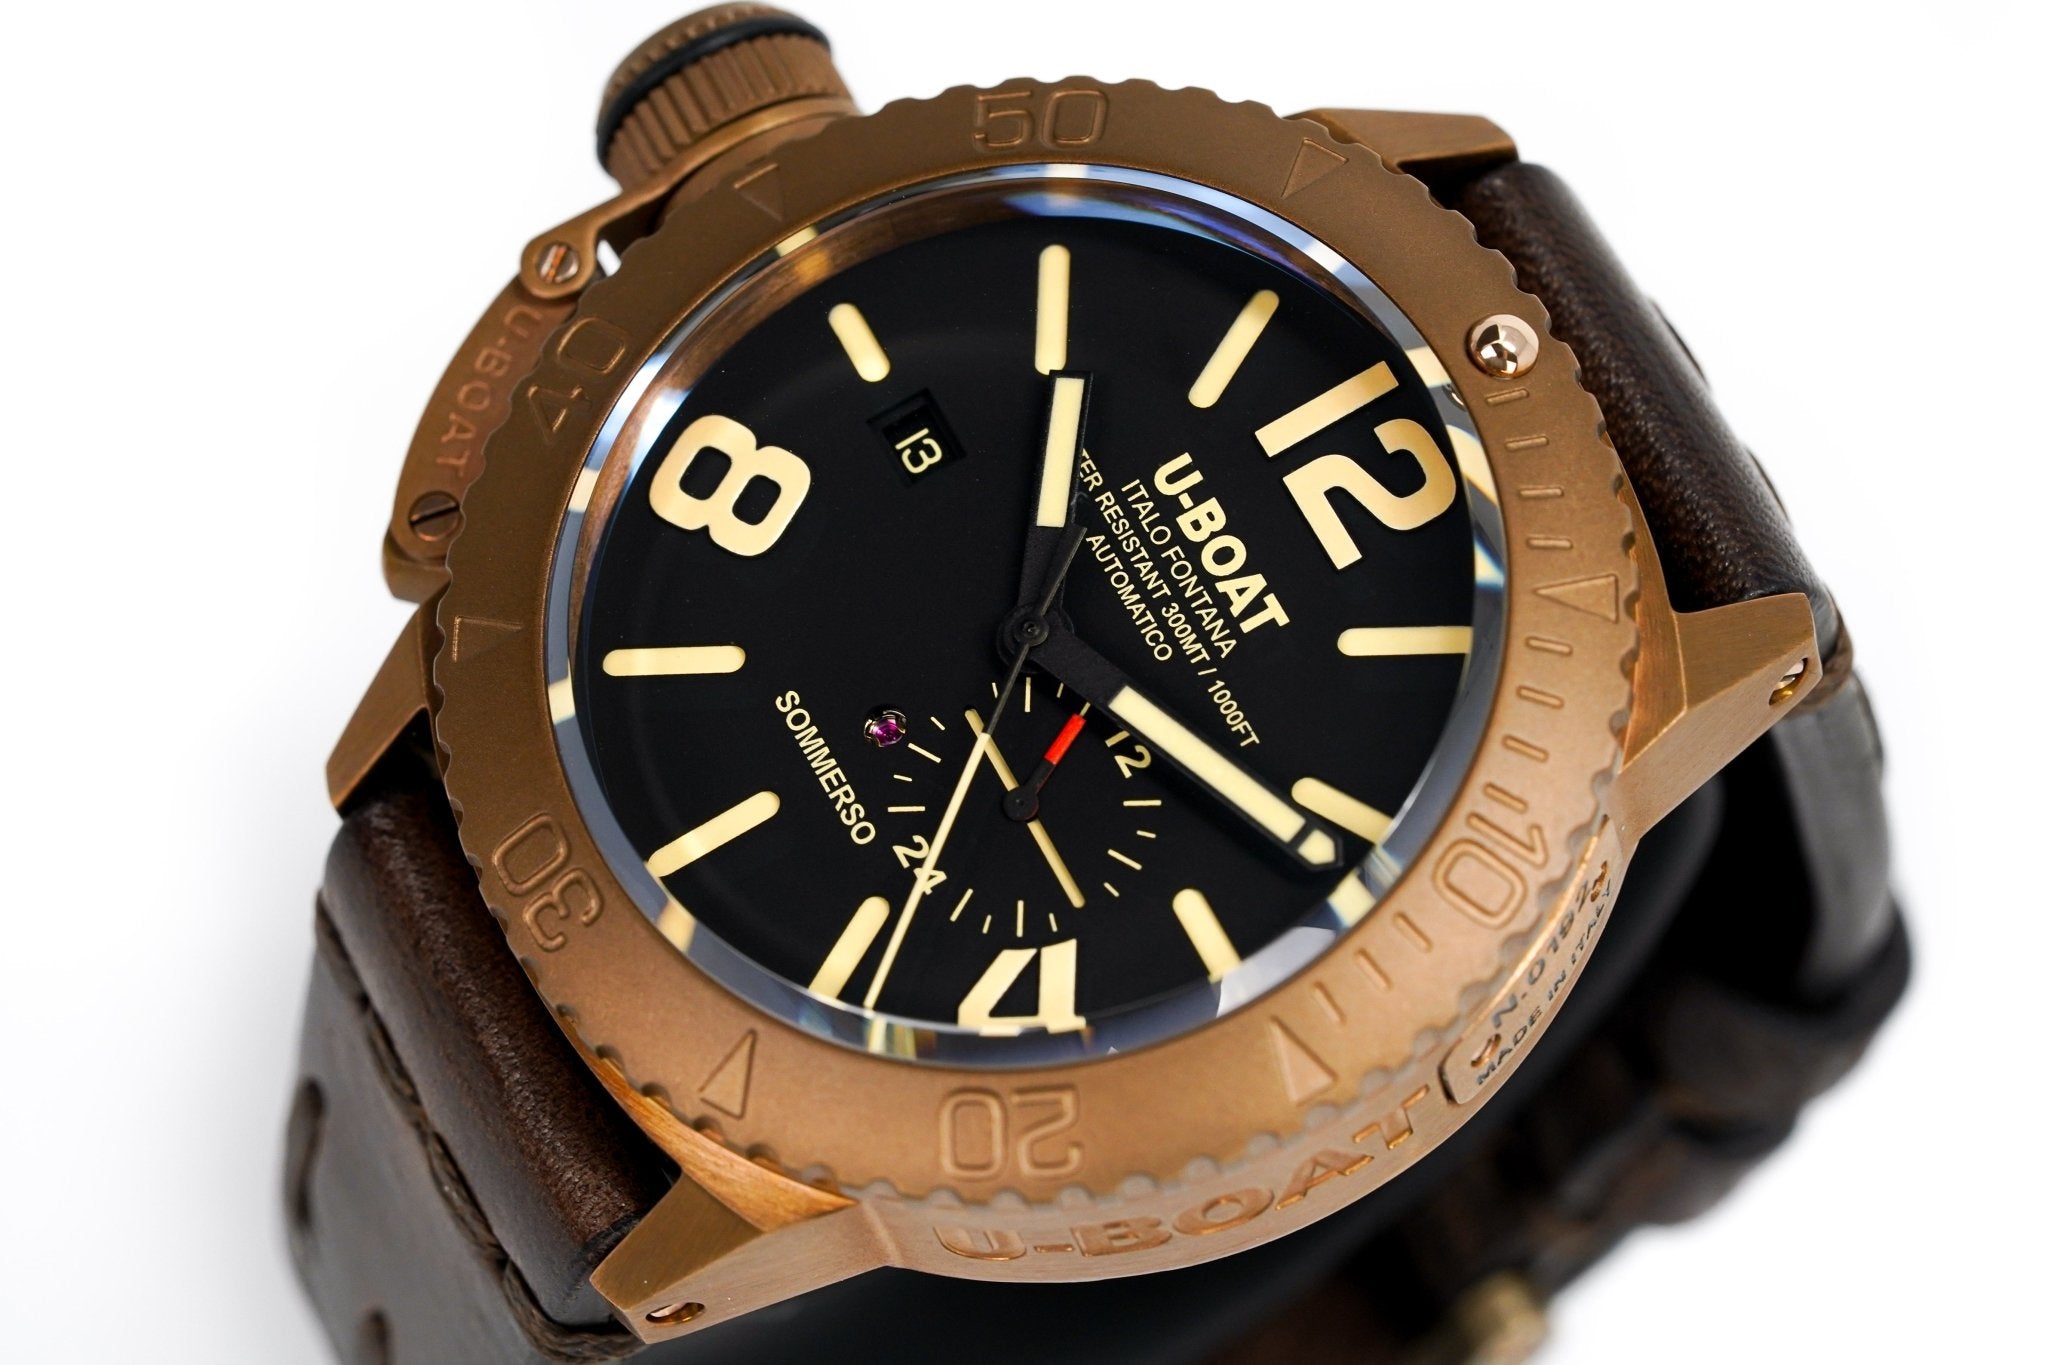 U-Boat Watch Sommerso 46mm Bronzo 8486 - Watches & Crystals